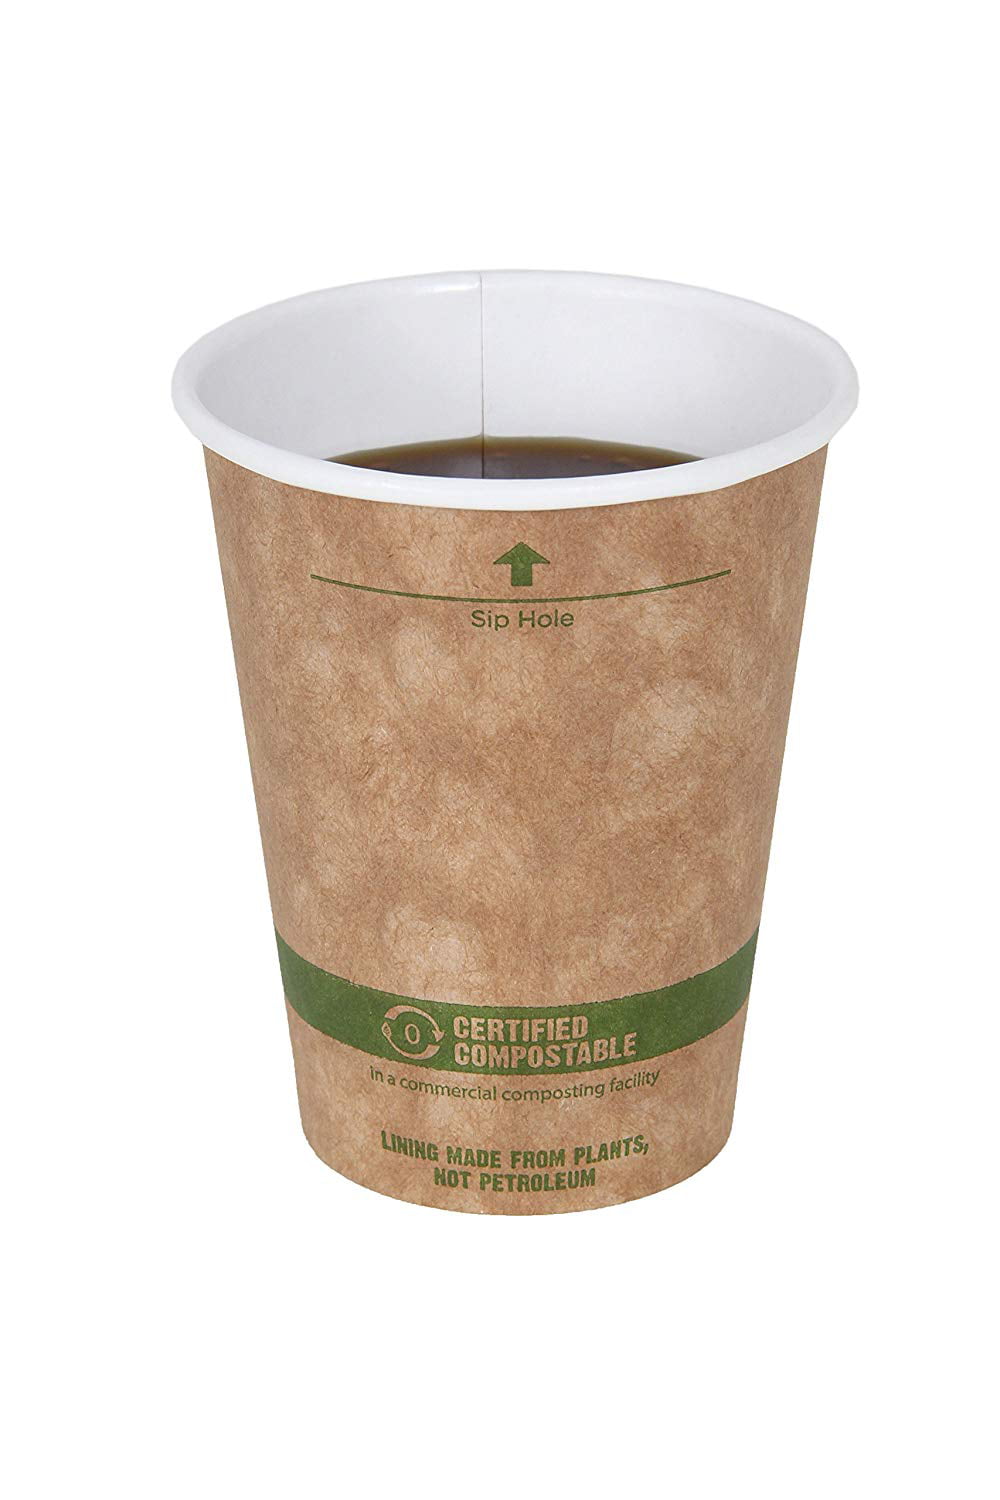 8 Ounce Coffee Hot Cup Package of 200 World Centric's 100% Biodegradable